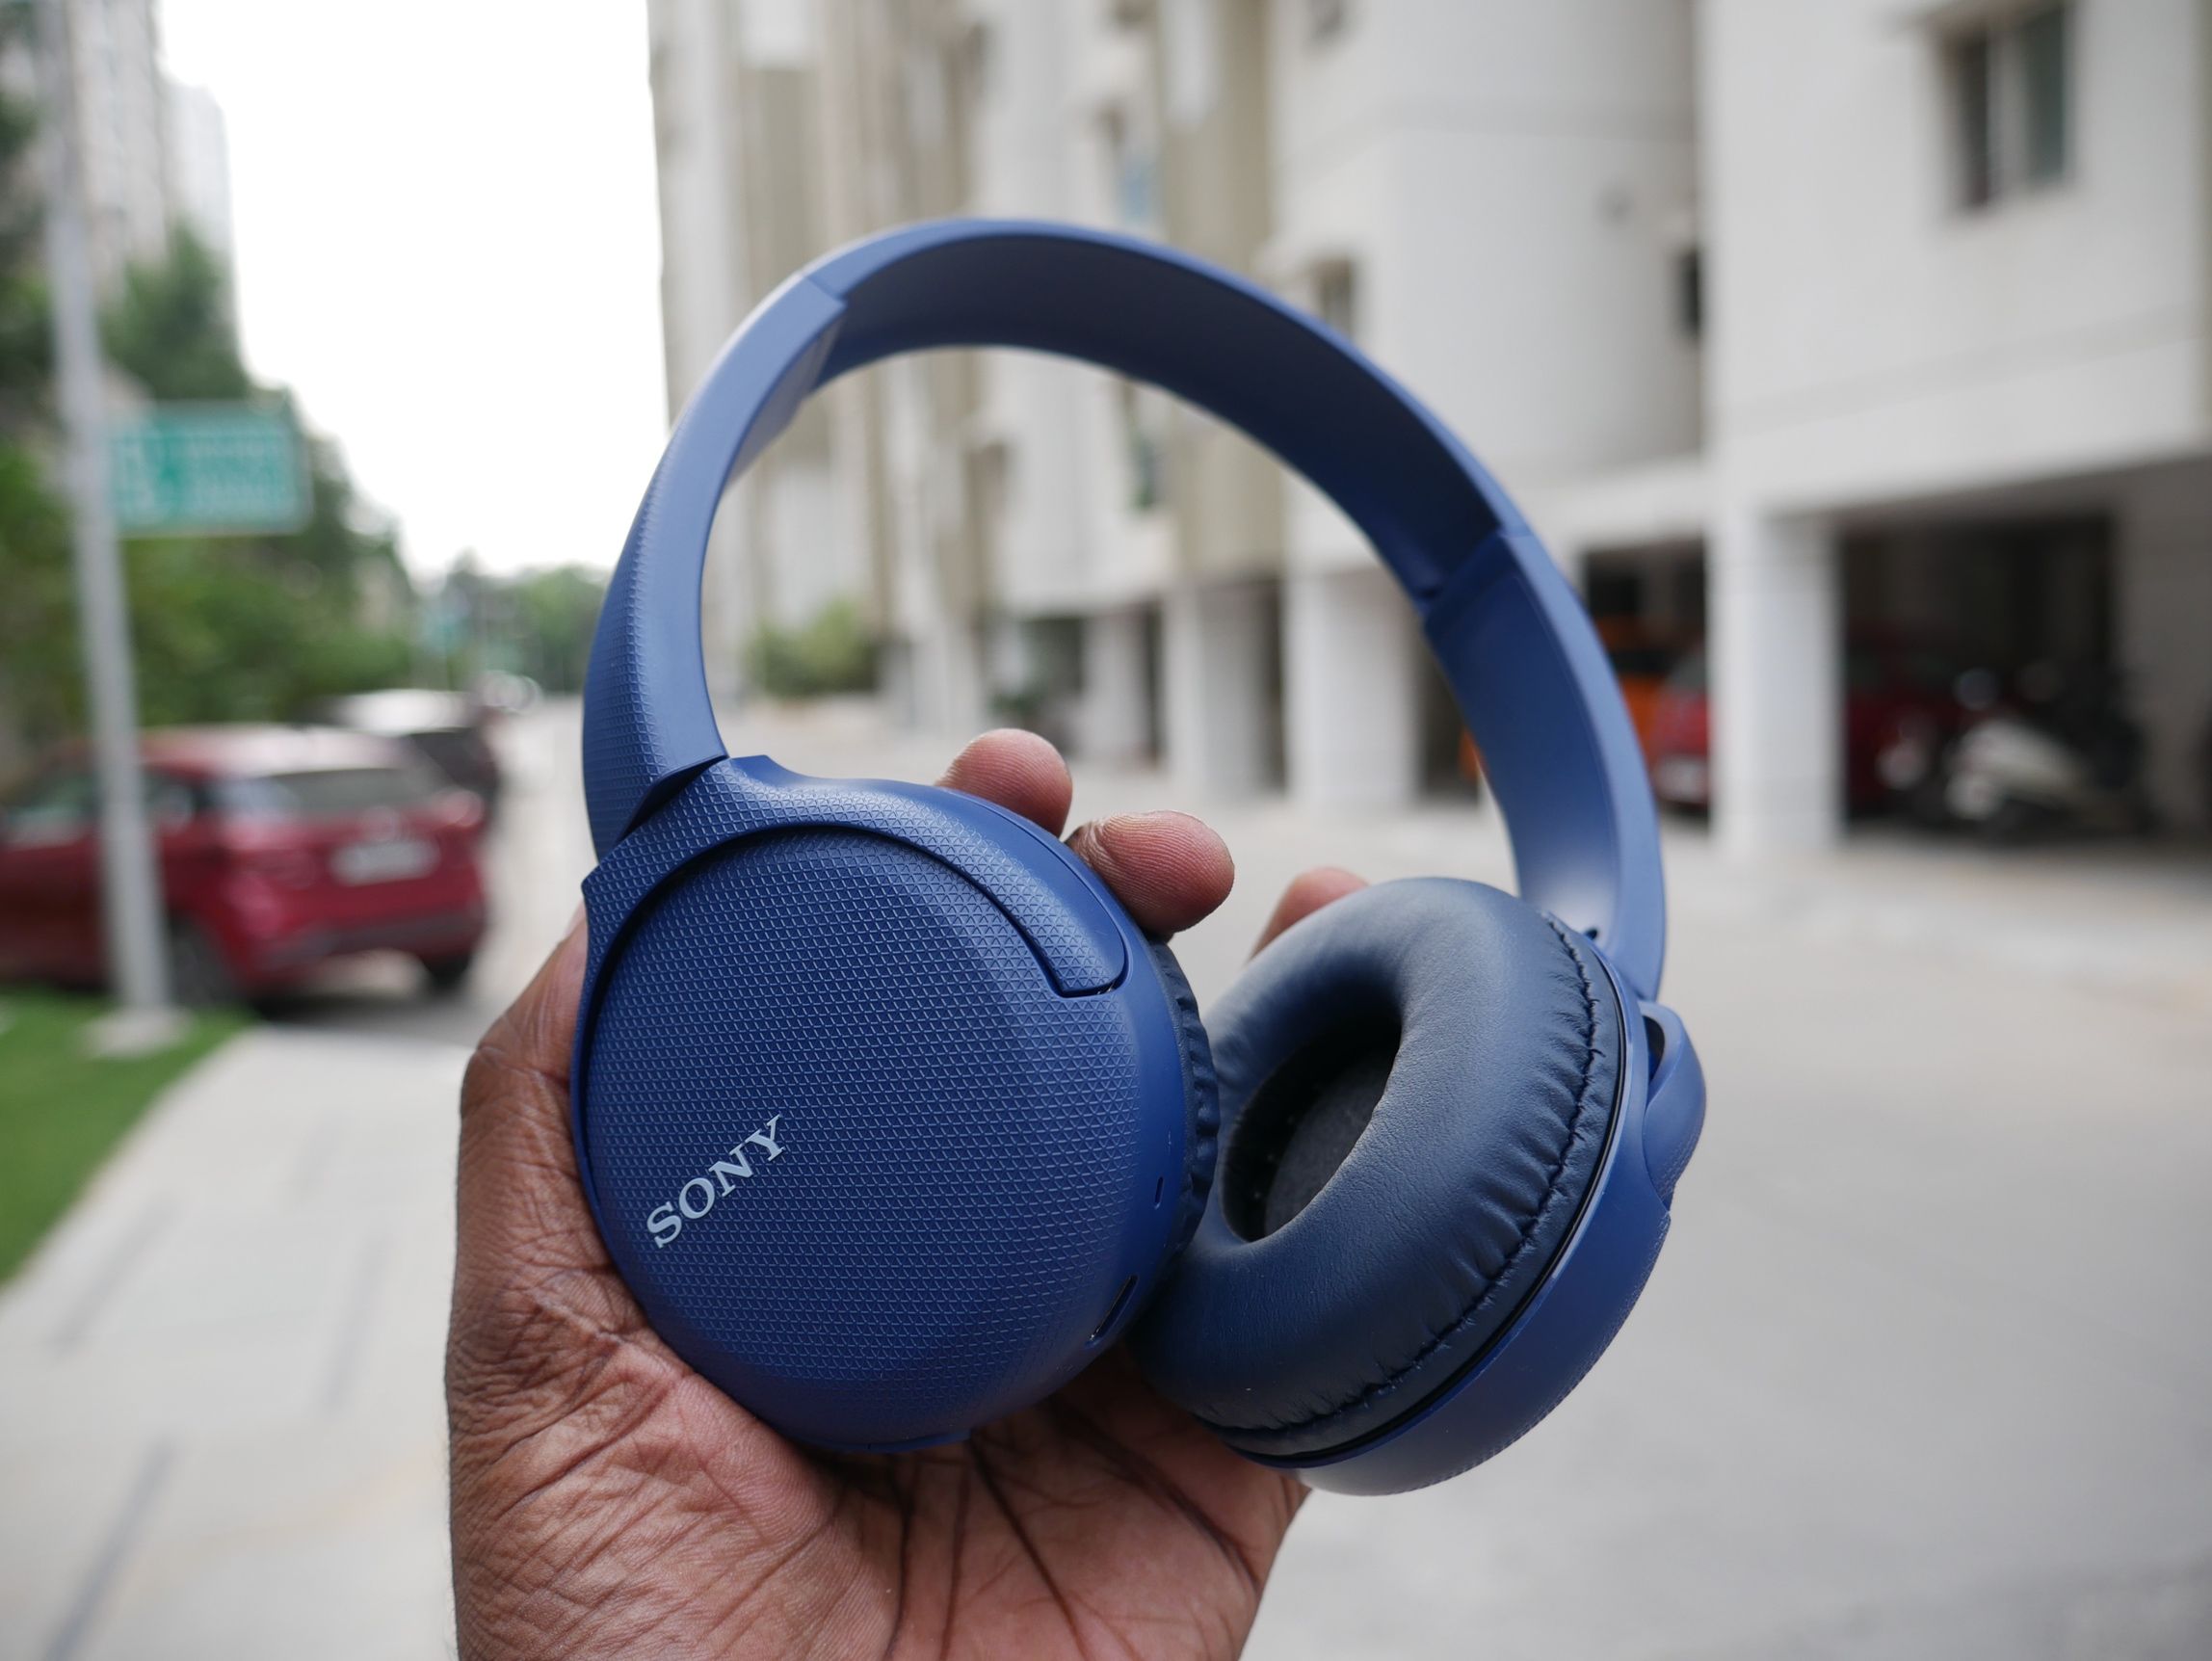 Sony WH-CH510 Headphones Review: Wireless Audio on a Budget!